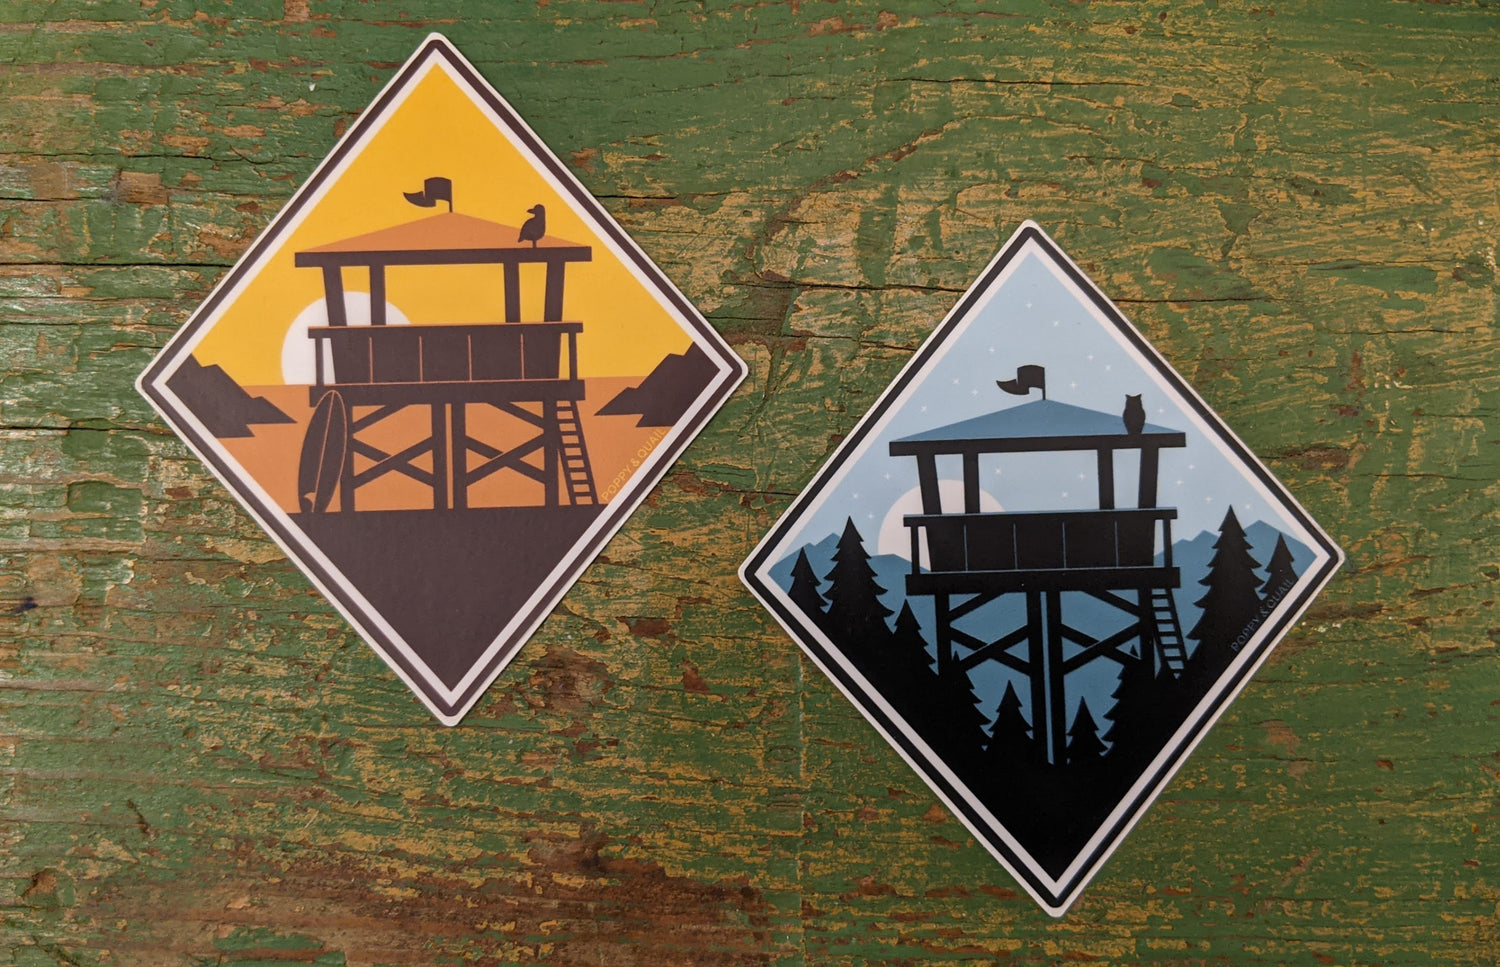 Lookout sticker series by Poppy & Quail in diamond shape with sunset lifeguard stand scene and nighttime fire lookout scene